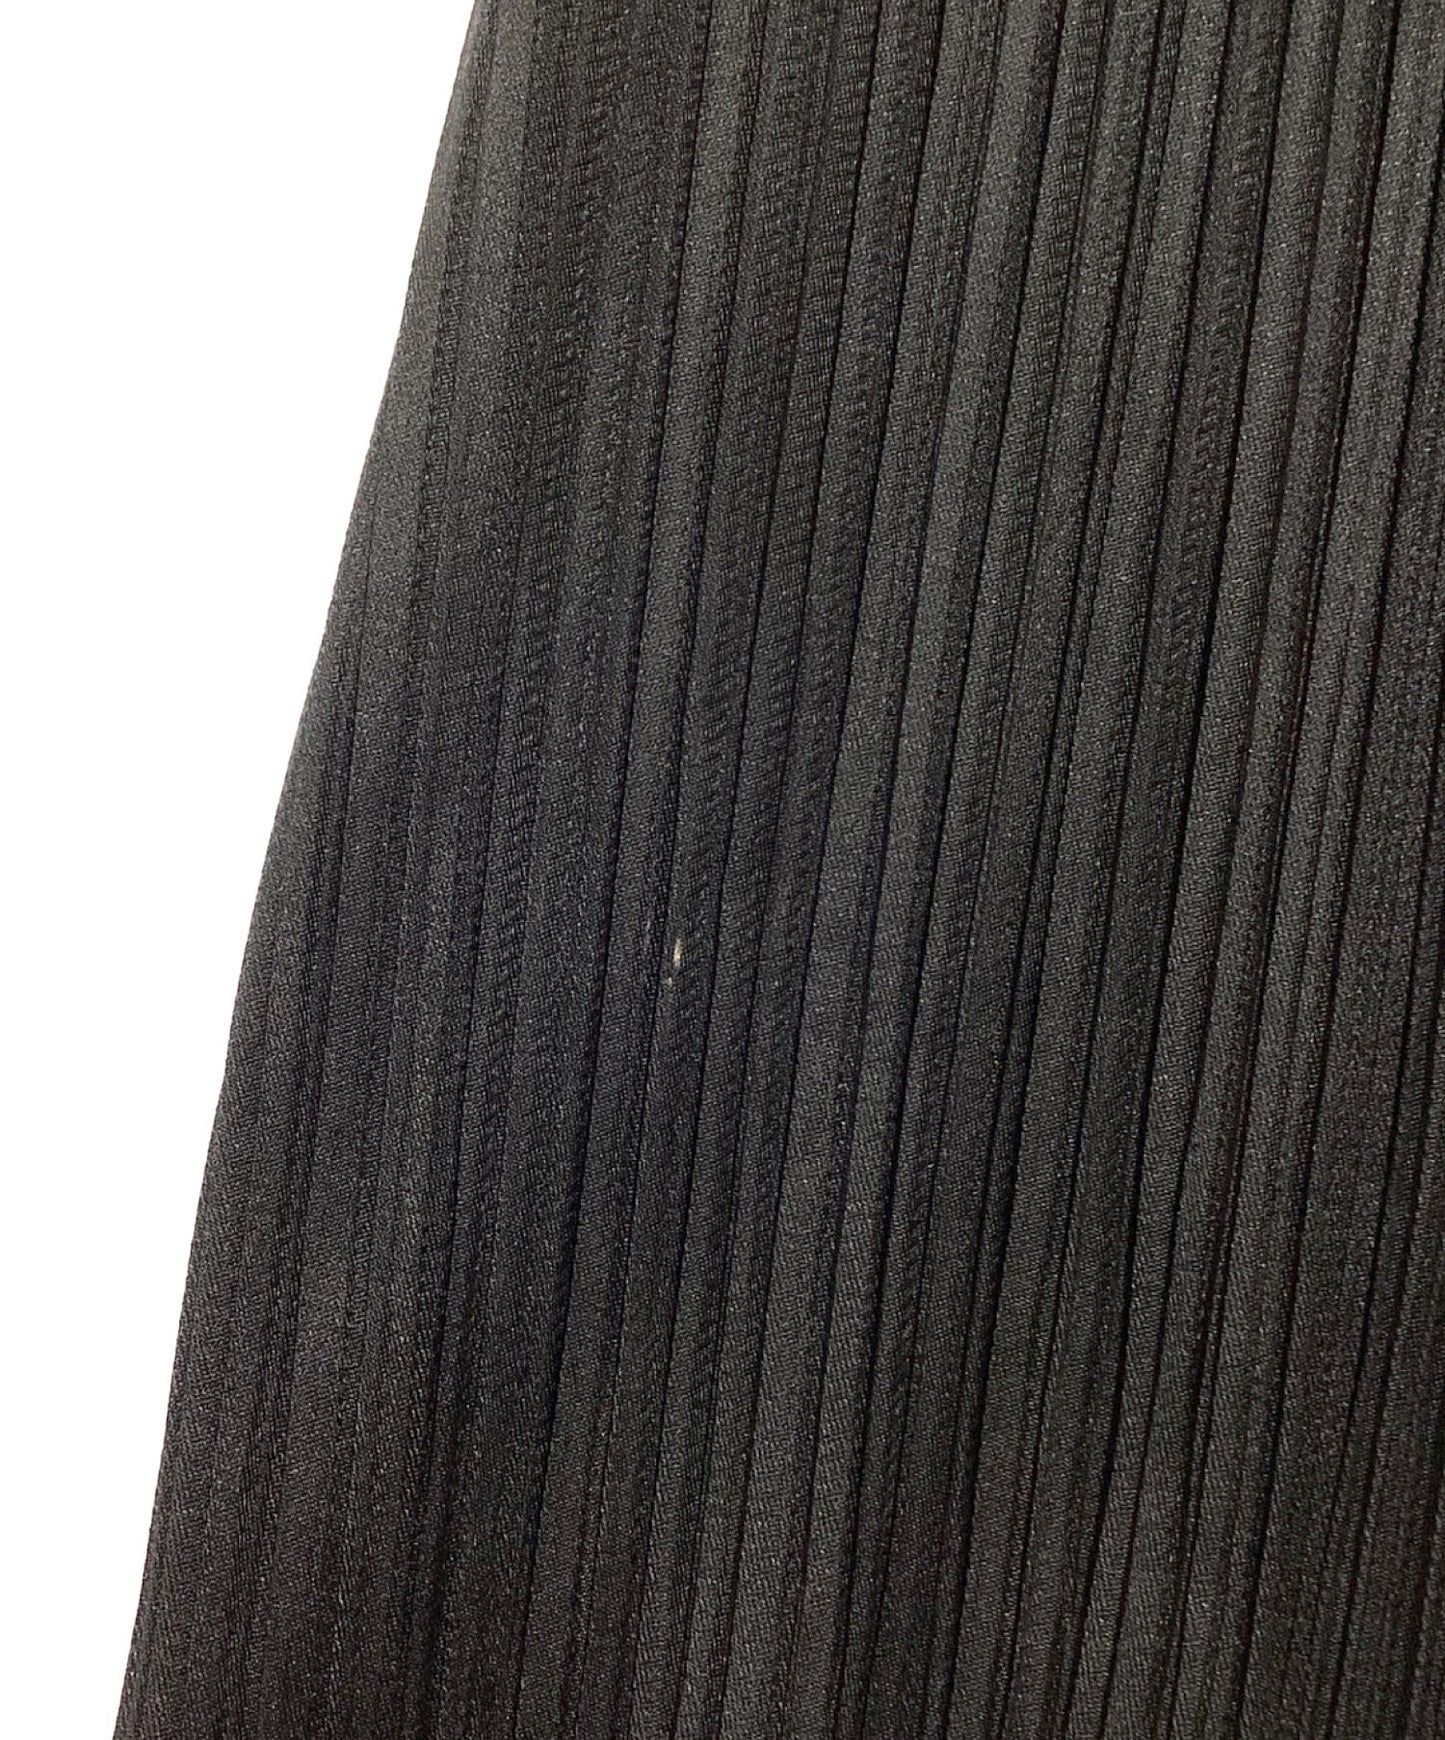 [Pre-owned] PLEATS PLEASE Pleated flared long skirt PP23-JG163